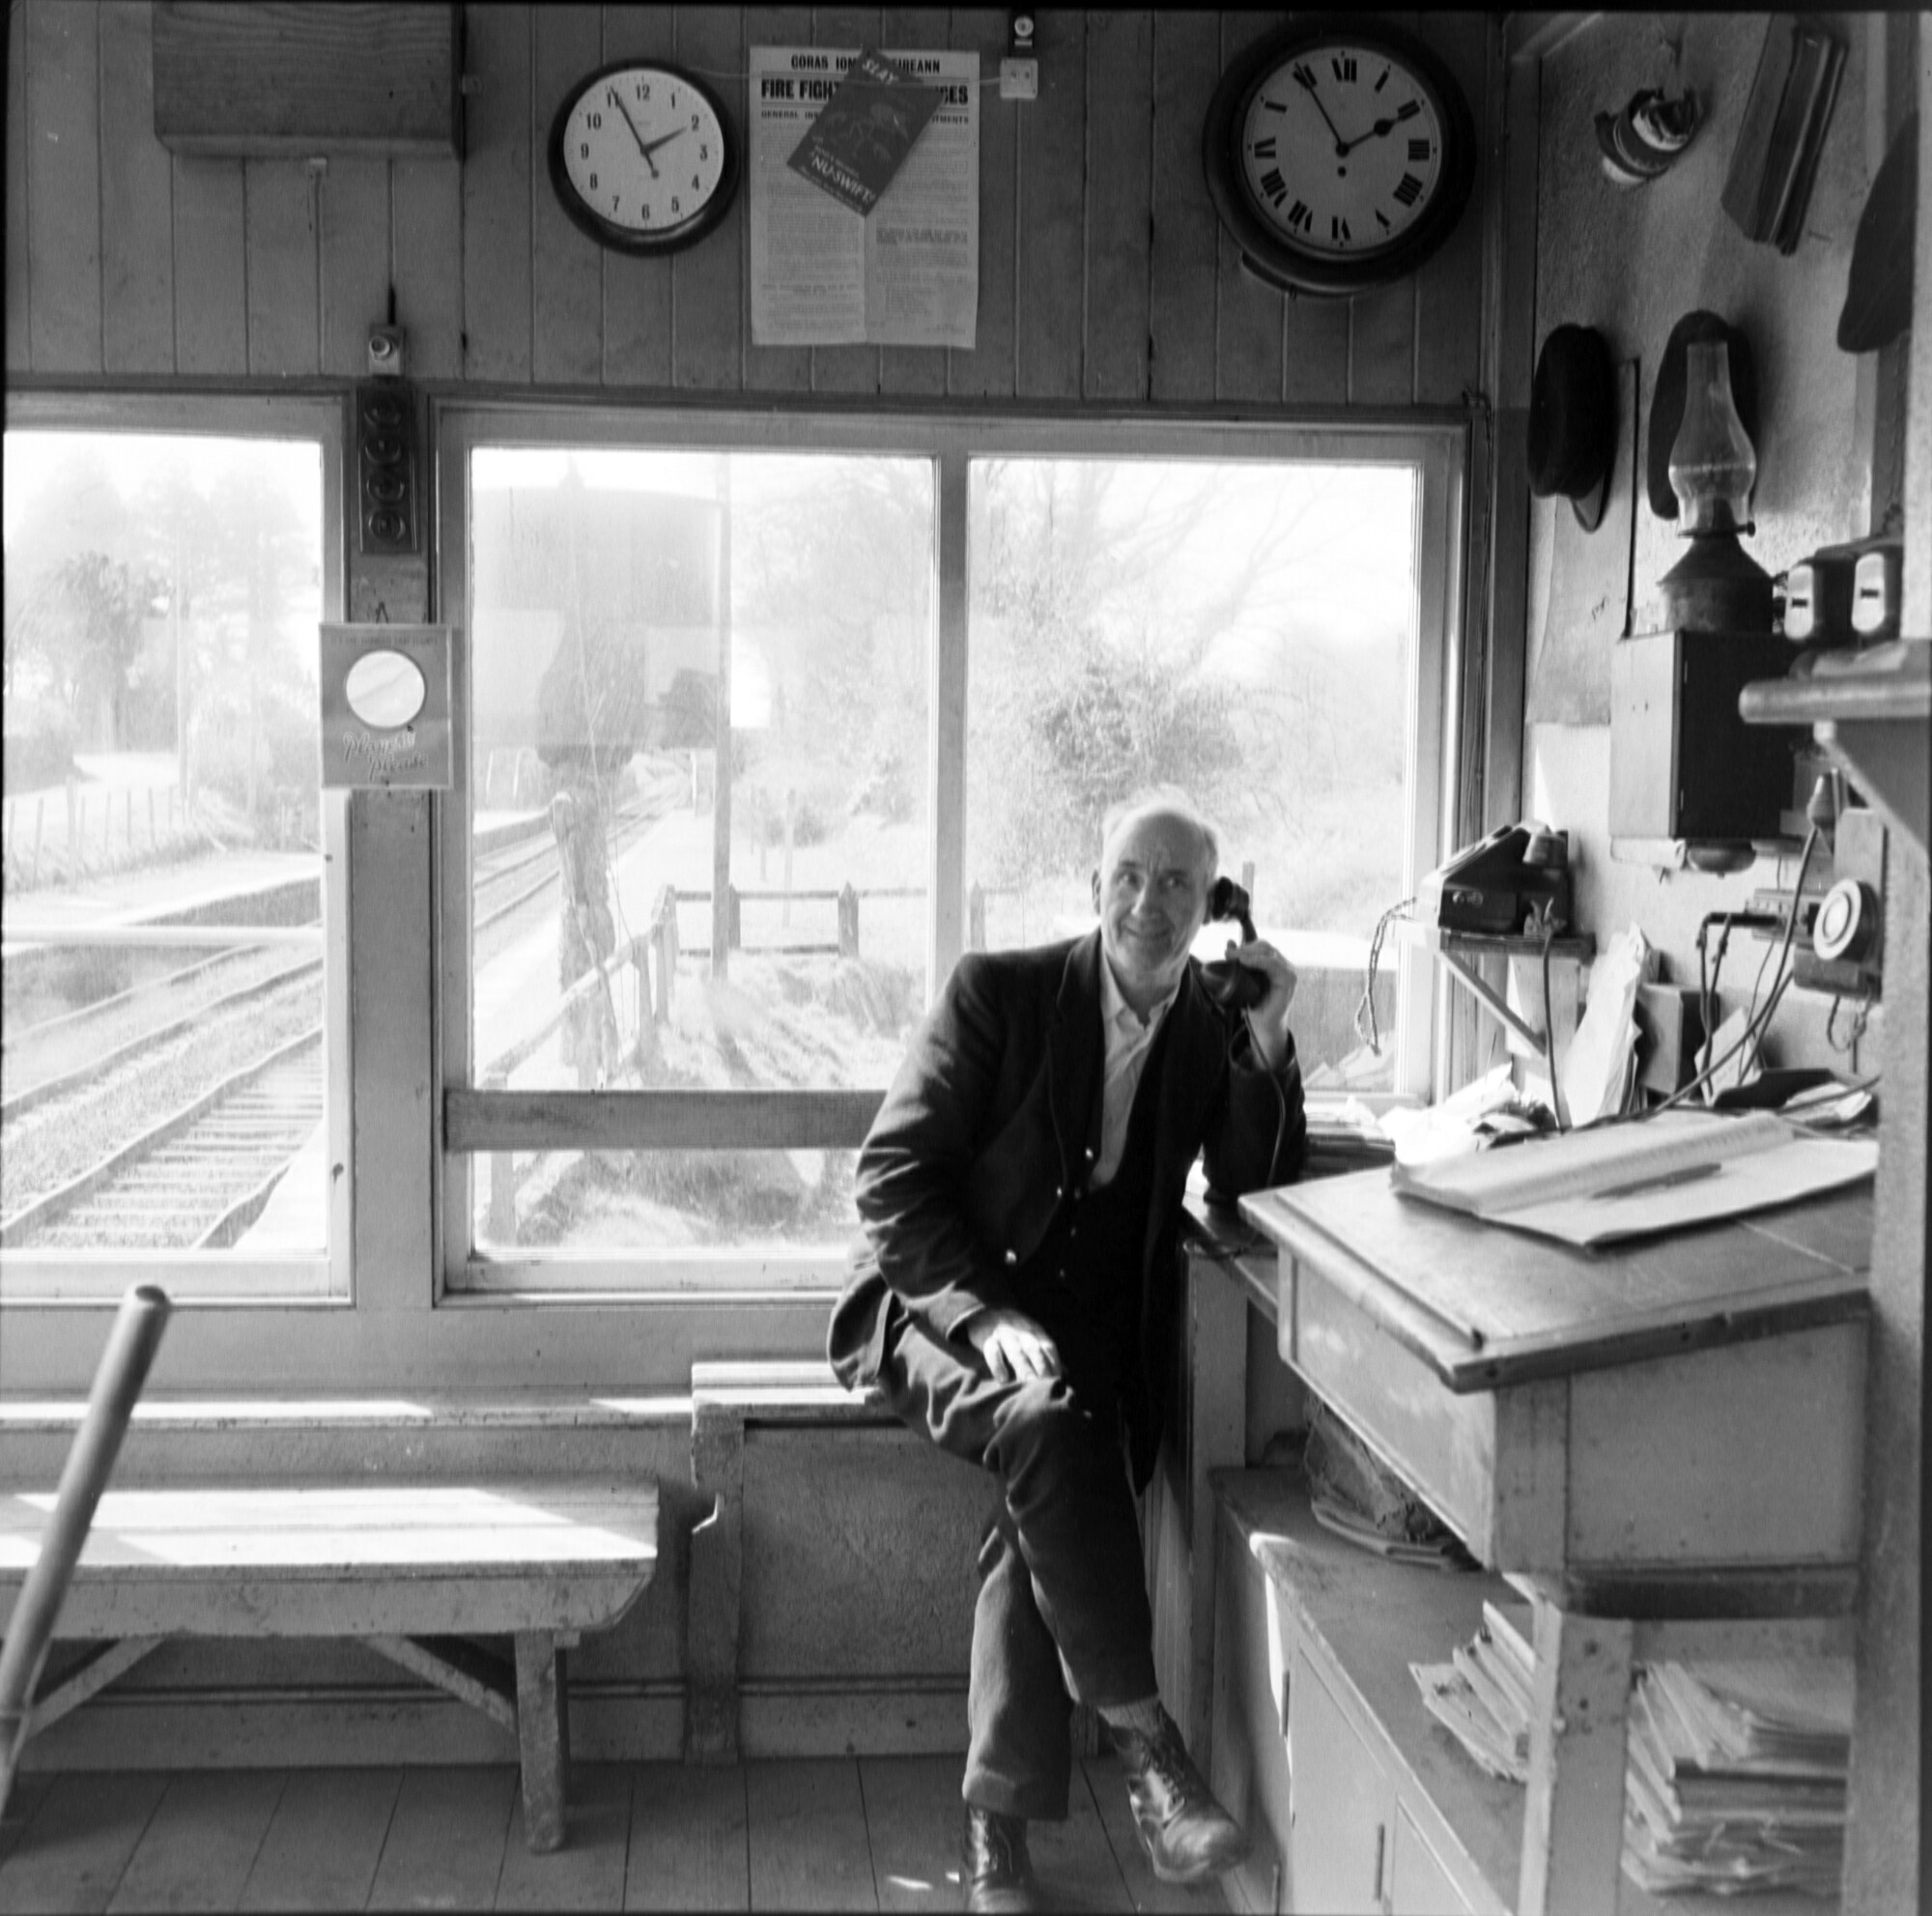 Ireland 1960s, April 10, 1965 Fred McDonagh in his Signal Cabin, Enfield, Co. Meath at 1.55 p.m. We got some lovely information on Fred from his grandson Traingraham: "A wonderfull photo of my Grandad, he was just after moving from Moyvalley station some 3 miles down the track which was just after closing down. " A true Gentleman" Lived in Moyvalley station till he died in Naas hospital on the 7 July 1977, Retired in November 71 or 72, had a daughter and two sons. His wife died on 2 Jan 1983."